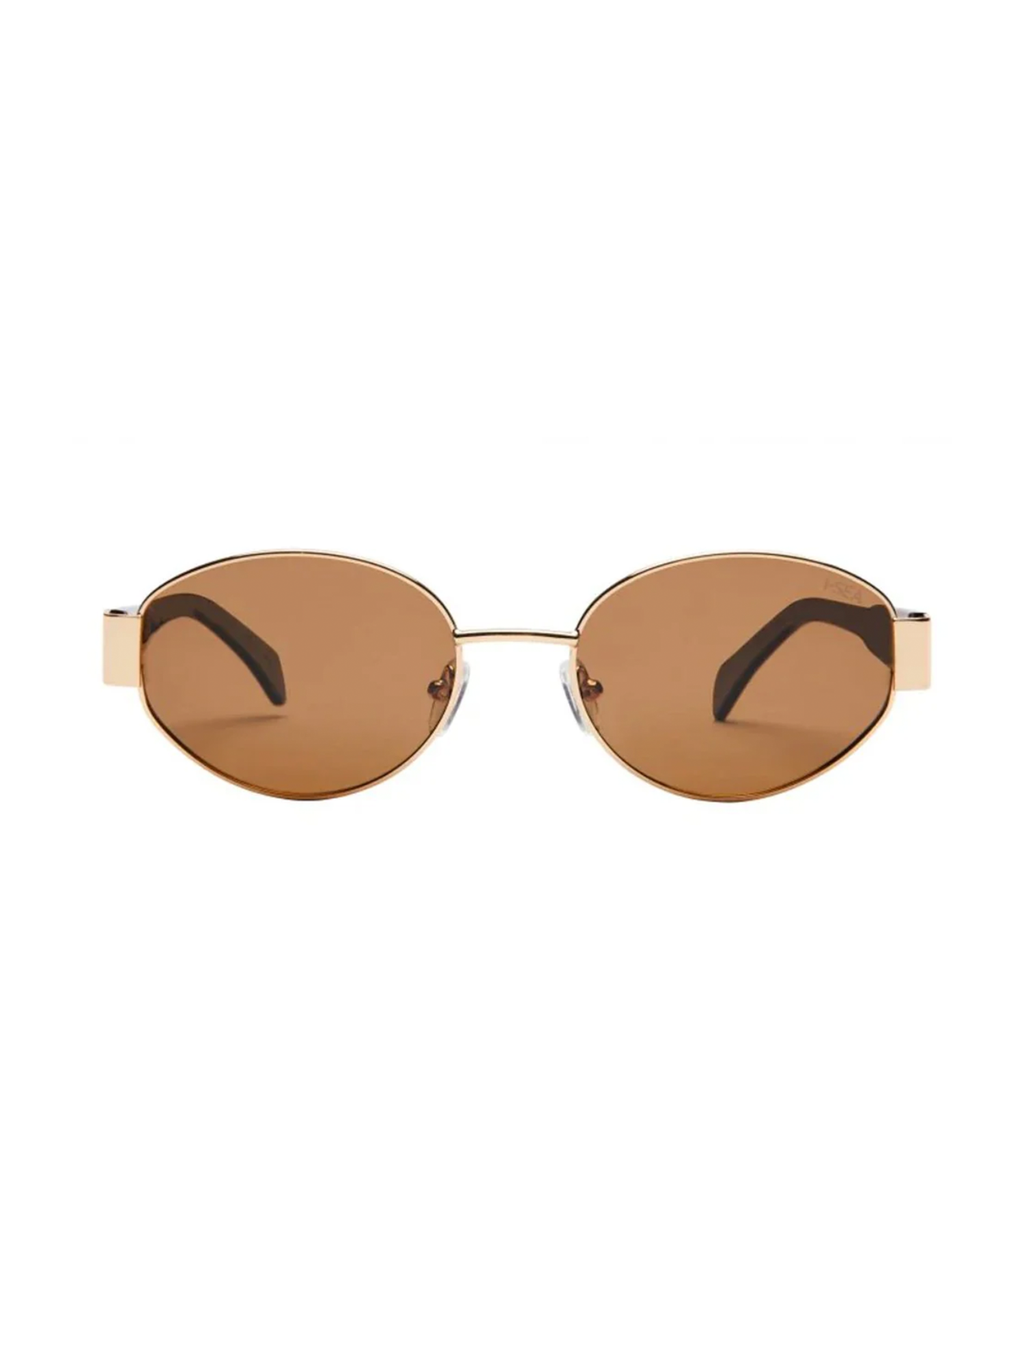 Lennox Sunnies in Gold/Brown - Stitch And Feather